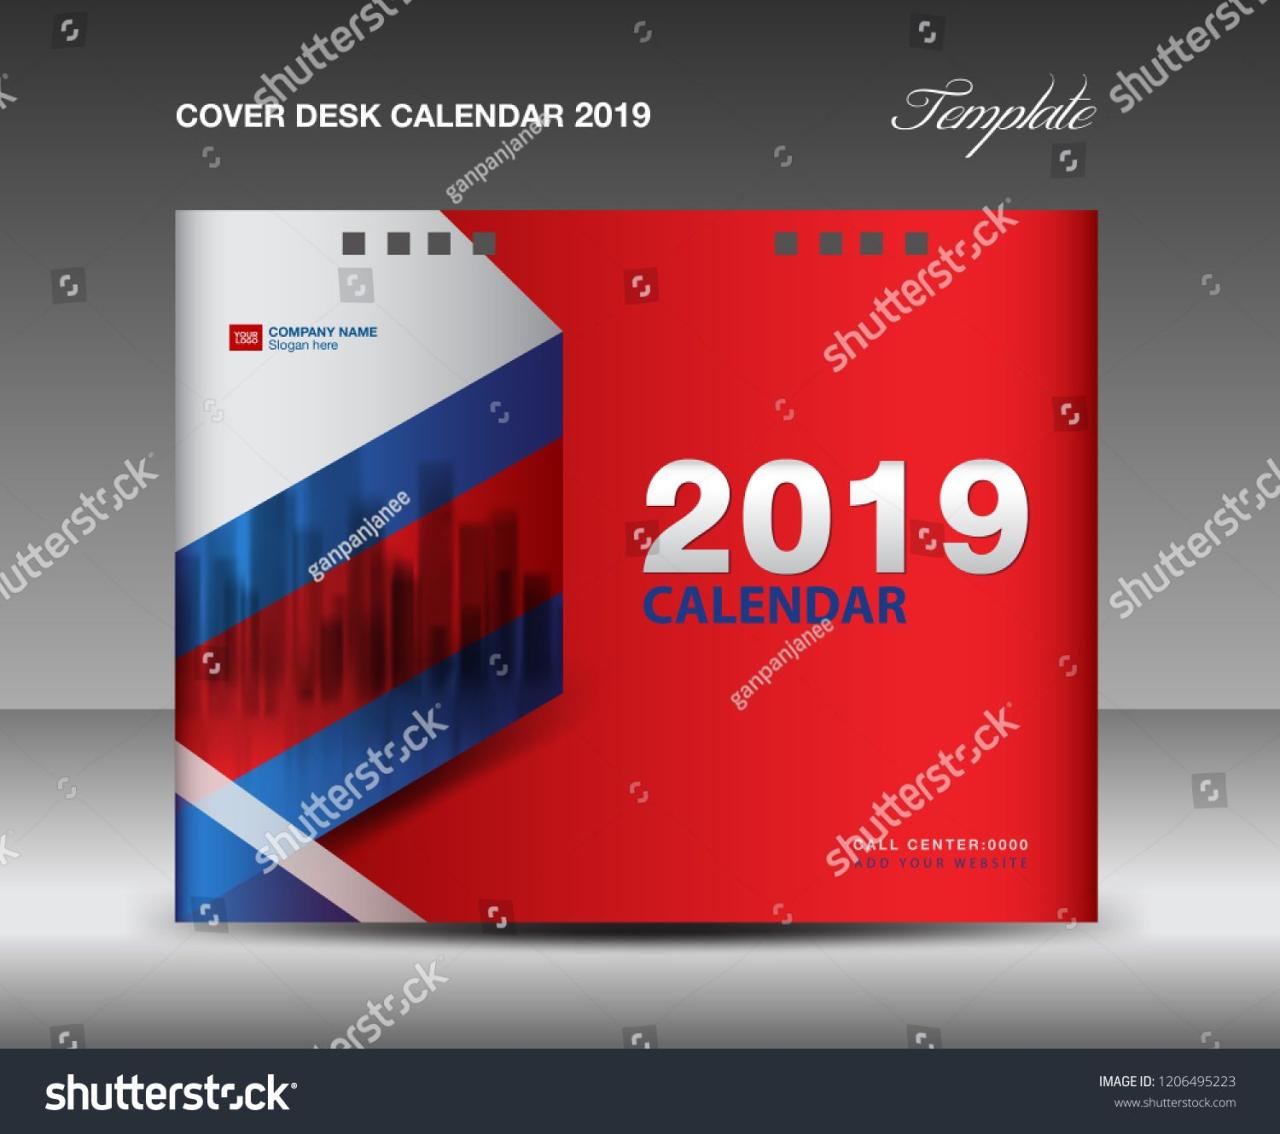 excel-holiday-calendar-template-2021-and-beyond-free-download-in-2021